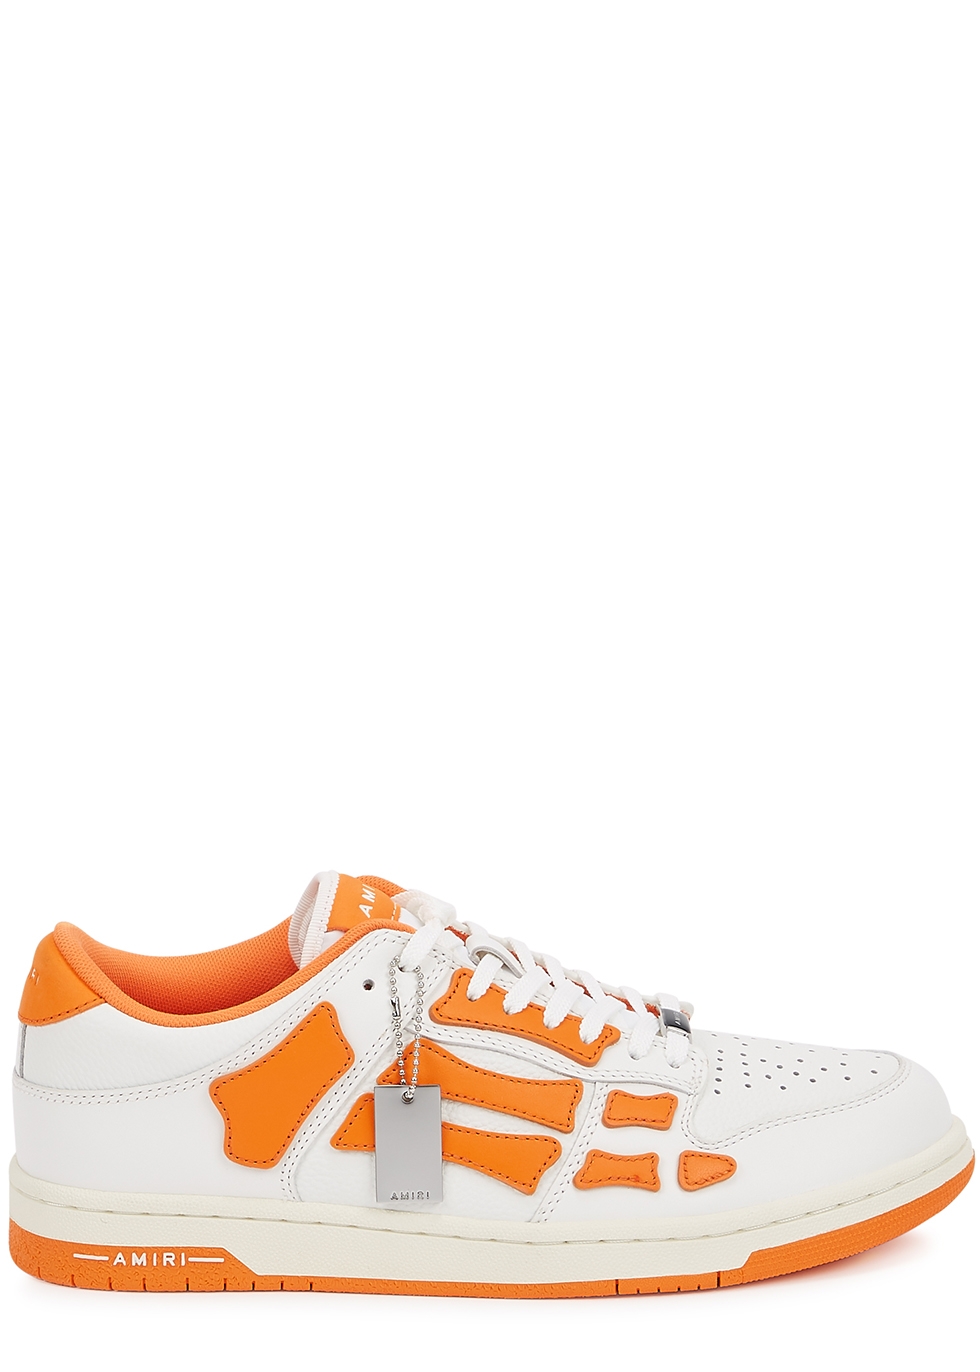 Skel white panelled leather sneakers